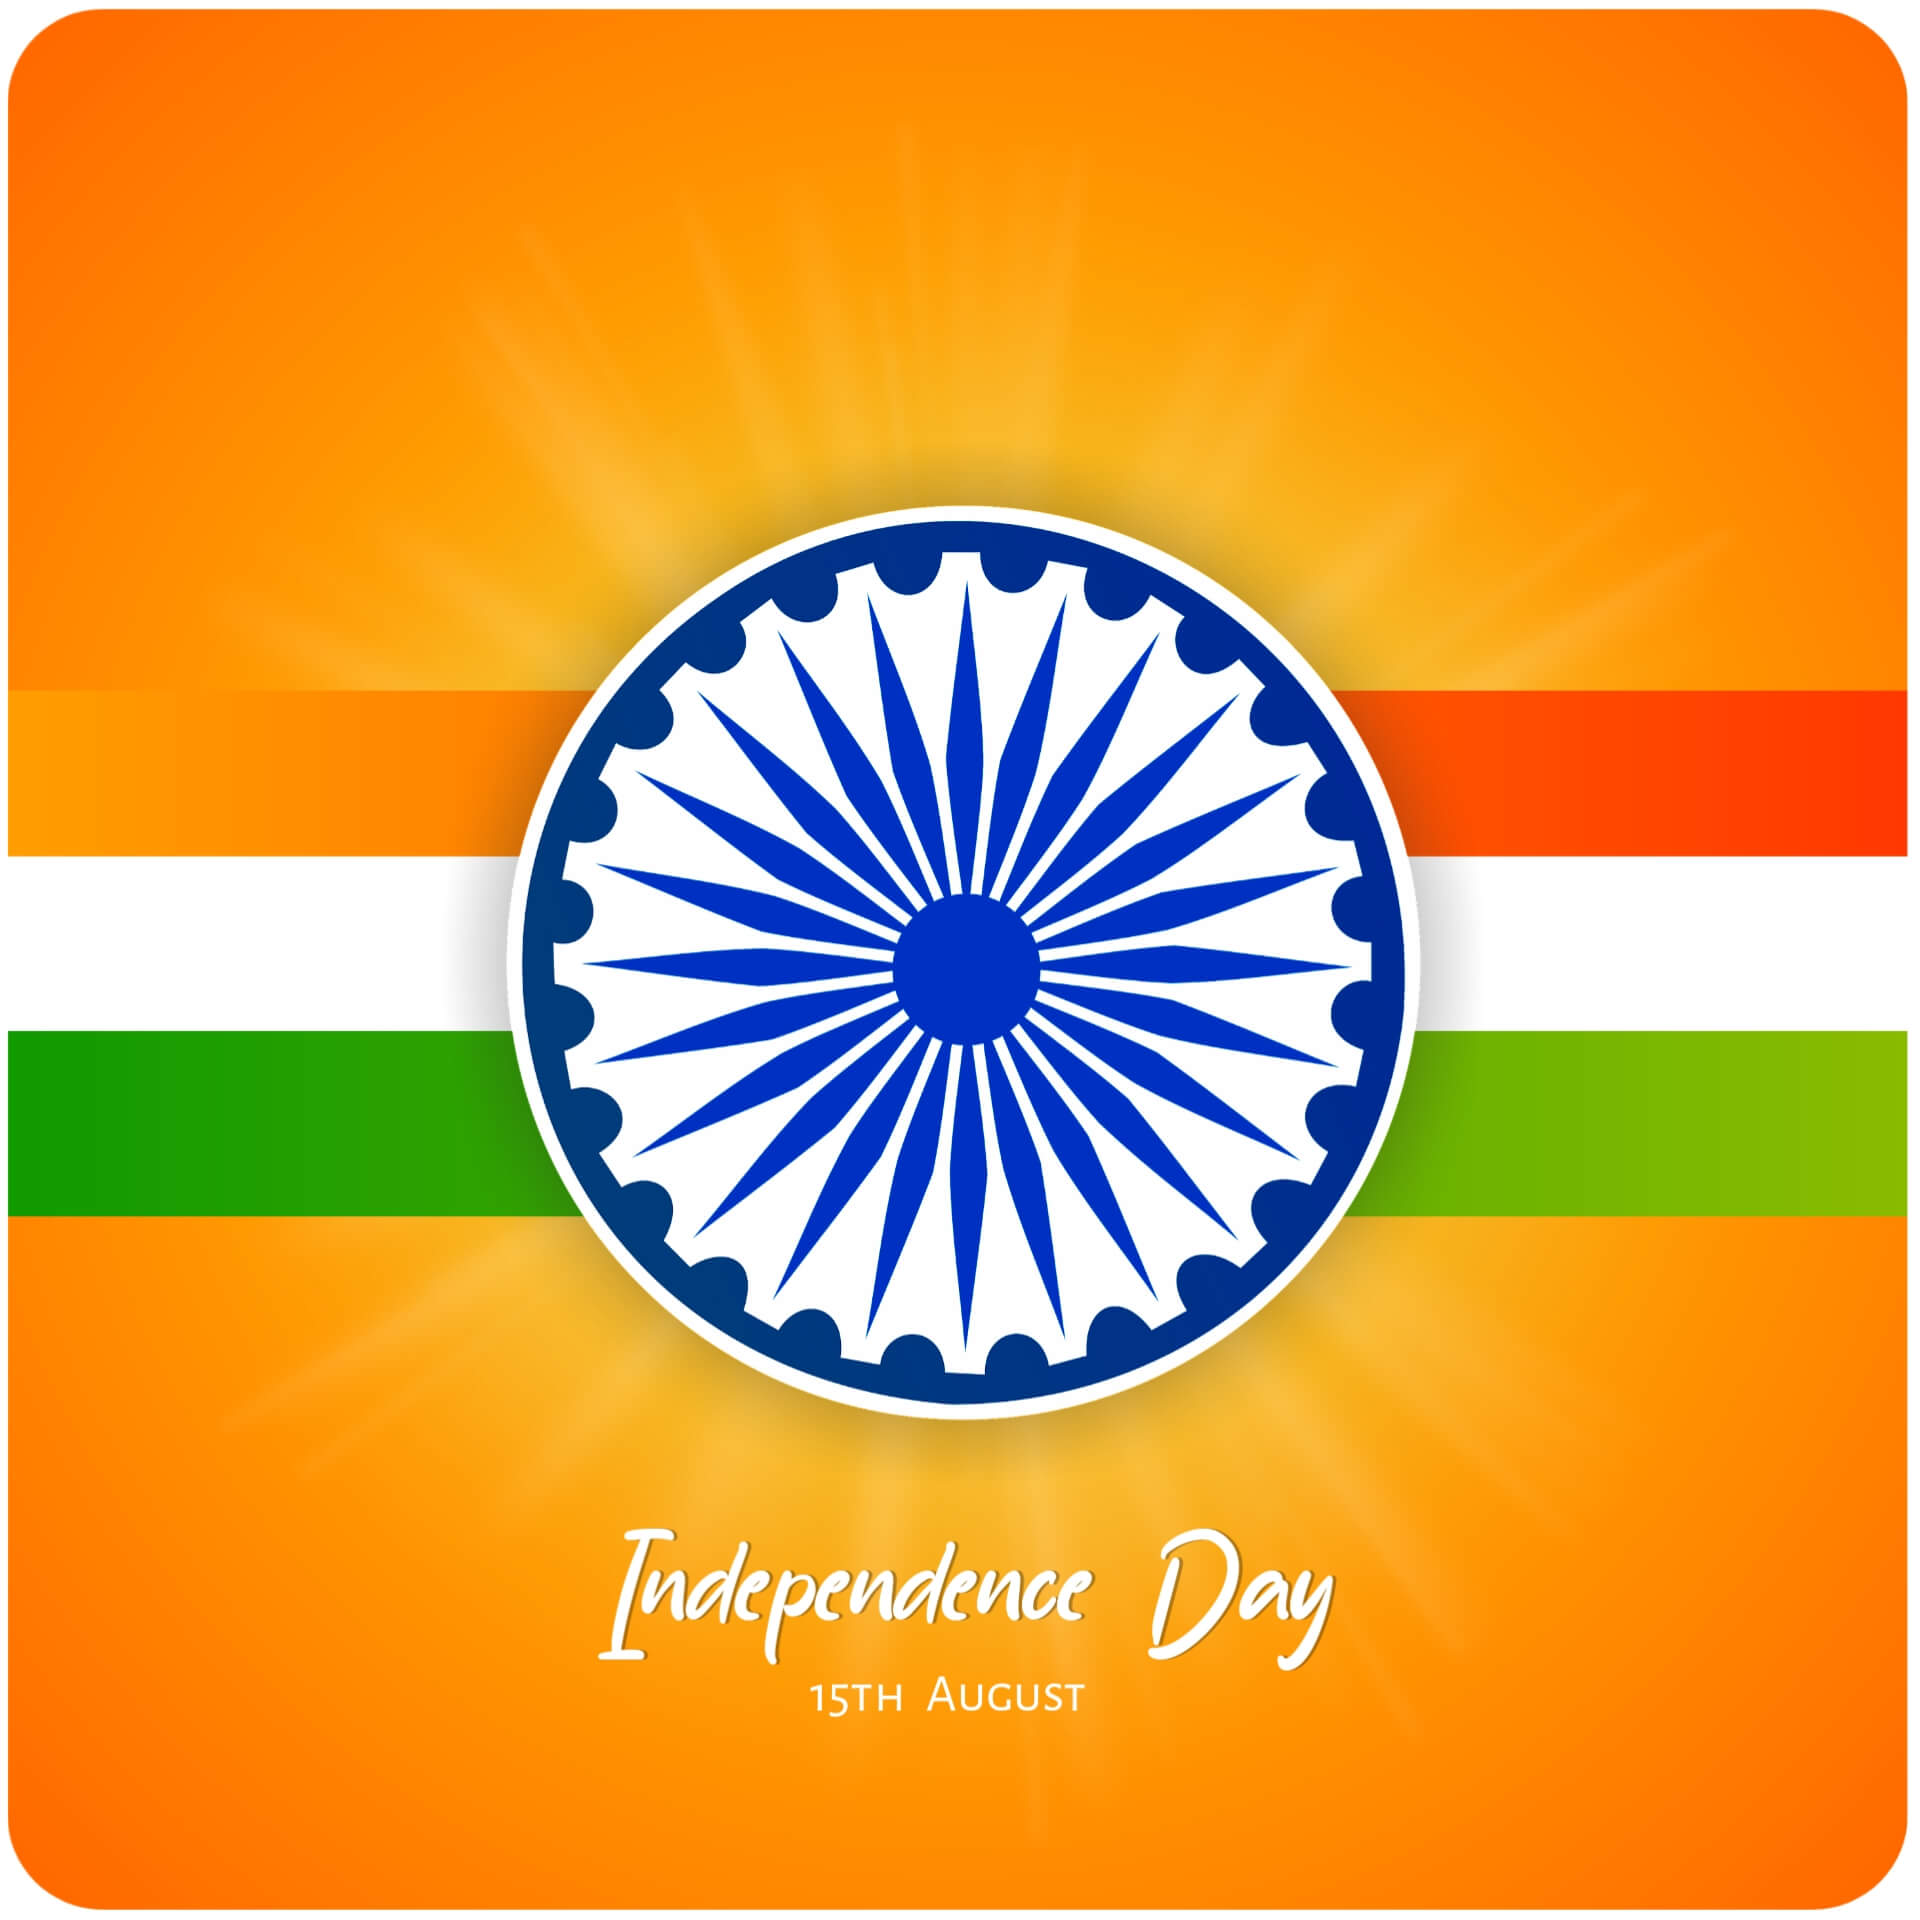 Happy Independence Day 2021: HD Images & Wallpaper Here is Swatantrata Diwas  Wishes, Greetings, Status, Photos, PNG to Share